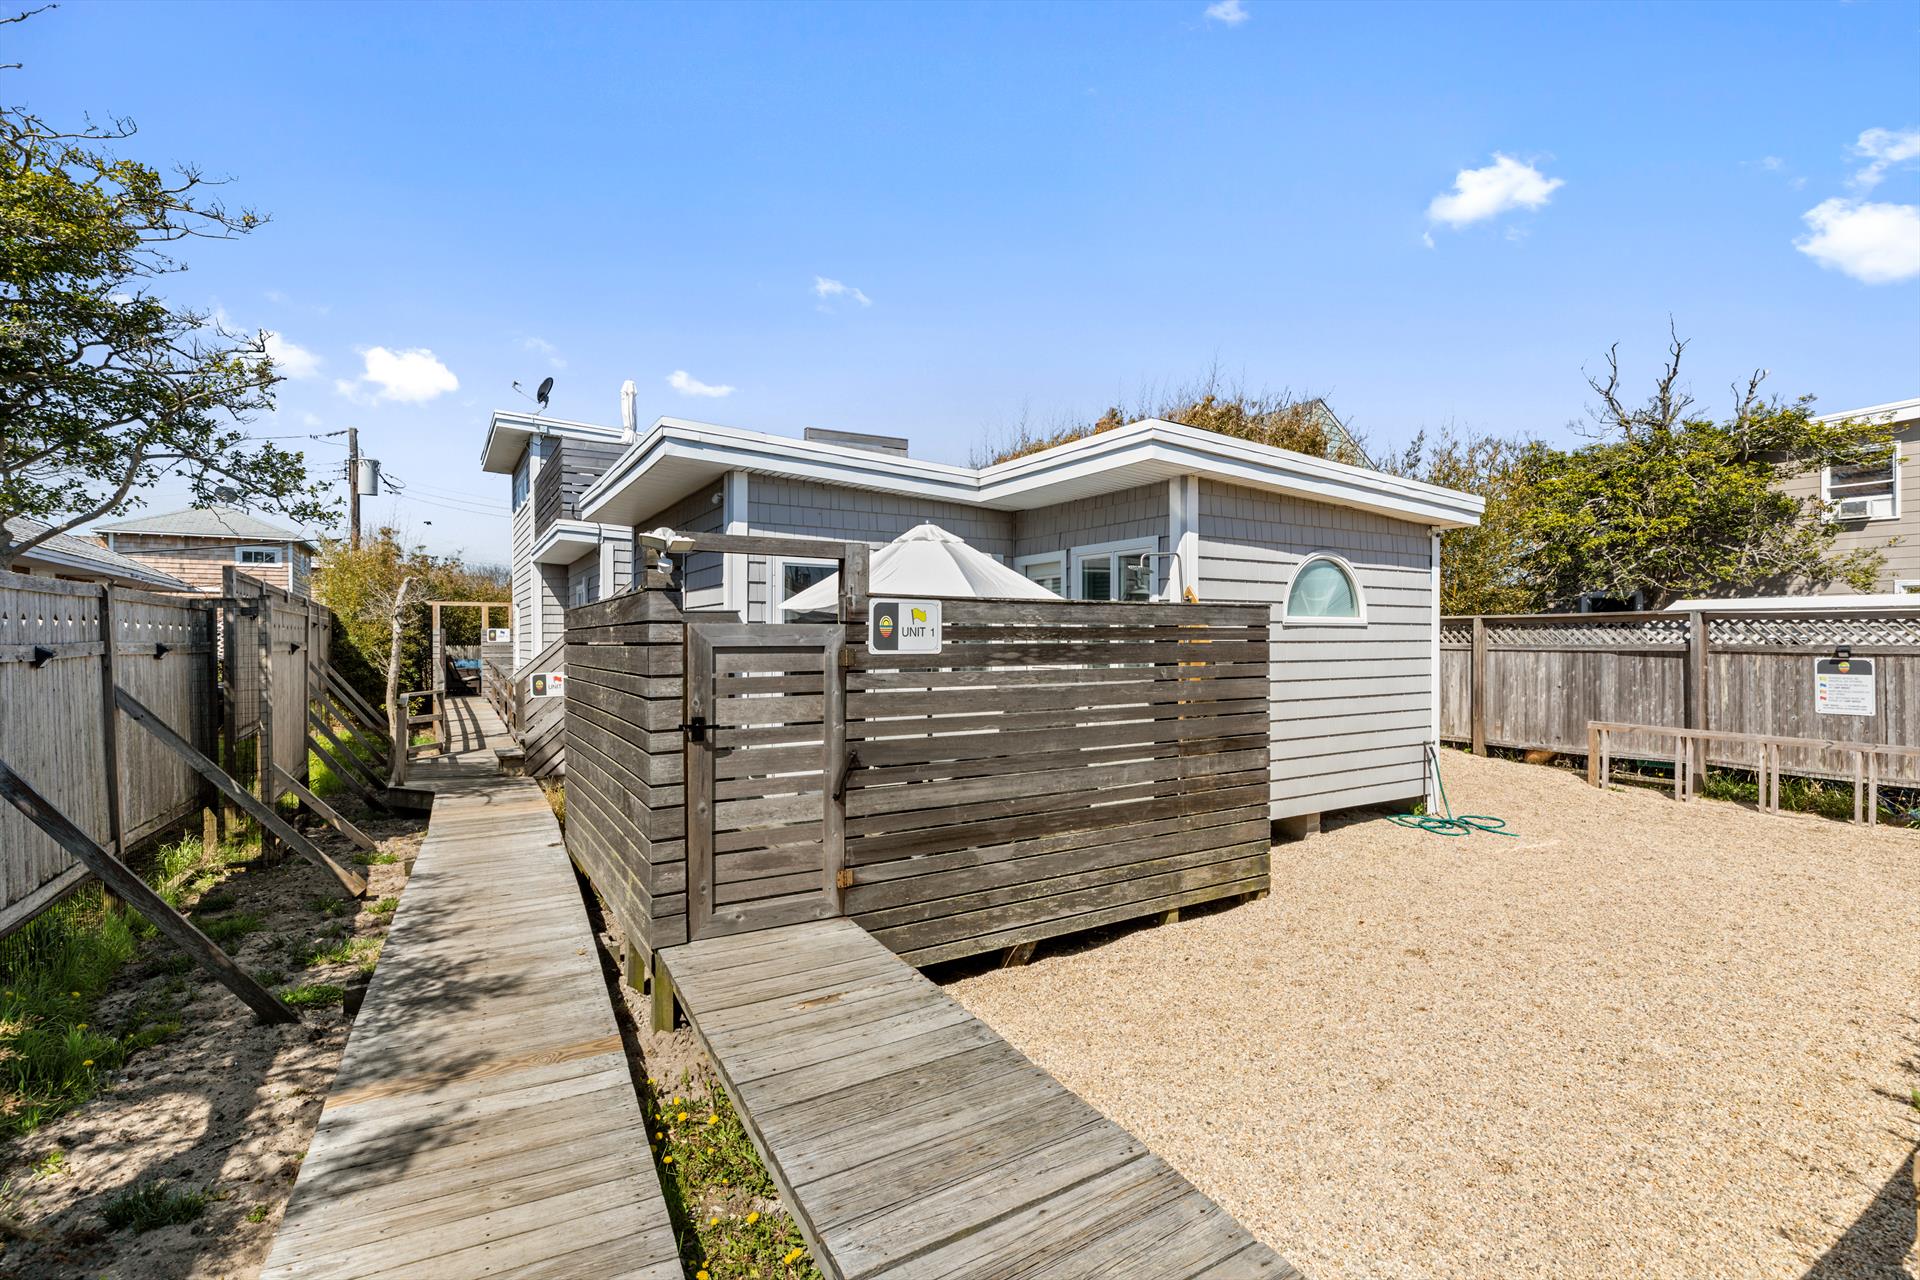 Rare opportunity to own a 3 family home on Fire Island! Tons of upgrades, including all new roof, new roof deck, and Mini Split AC system throughout. Ideally located in the heart of Ocean Bay Park, this property is ideal for an investor or a savvy buyer looking to utilize one unit and rent out the other two.  Why pay your mortgage when you can have tenants pay it for you, and still get to enjoy your property?  The property has 3 separate apartments, each with its own private entrance and outdoor space.  The front unit has 1 bedroom, 1 bathroom, and its own gated, private deck area.  The middle unit has been tastefully updated, and has 1 bedroom , 1 full bathroom, and its own beautiful roof deck.  The rear unit is the largest, featuring 2 bedrooms, 1 full bathroom, a renovated kitchen, spacious living area, and private deck area with laundry and an outdoor shower.  Low taxes only $5,135! Affordable flood only $797. Rare opportunity! <br> Rental History: <br>
2020: 125k <br> 
2021: 145k <br>
2022: 146k now fully booked